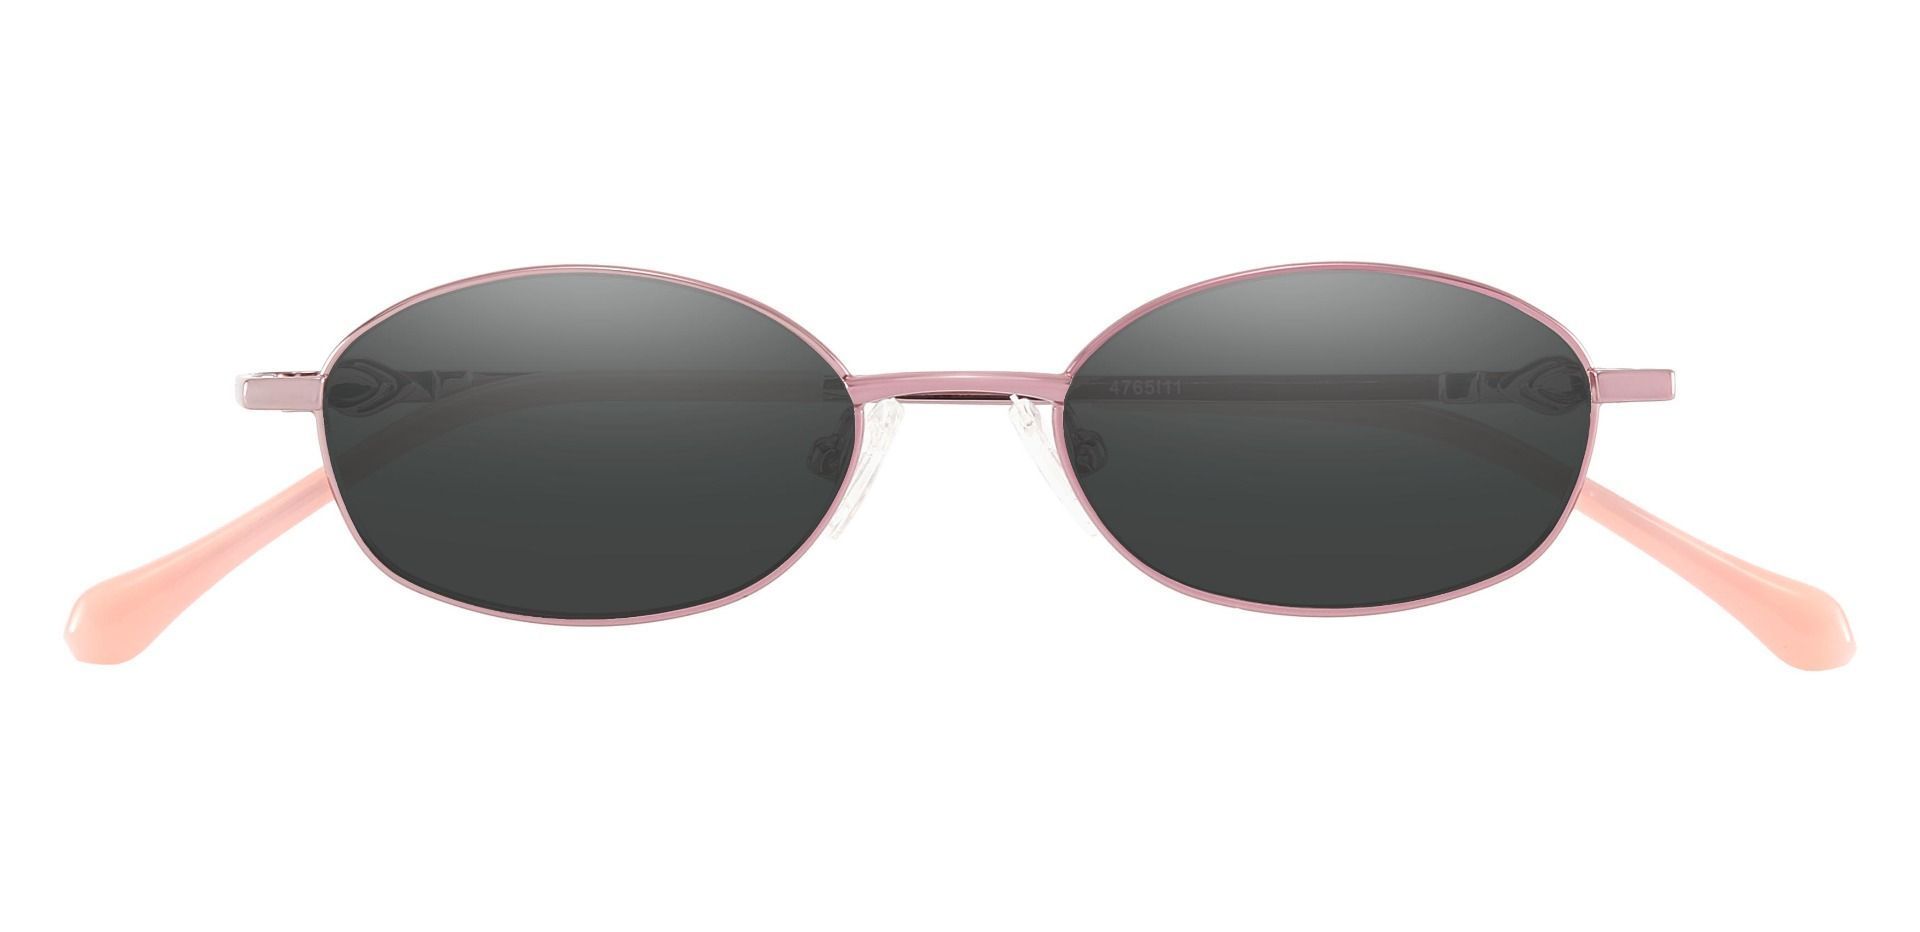 Fletcher Oval Non-Rx Sunglasses - Pink Frame With Gray Lenses